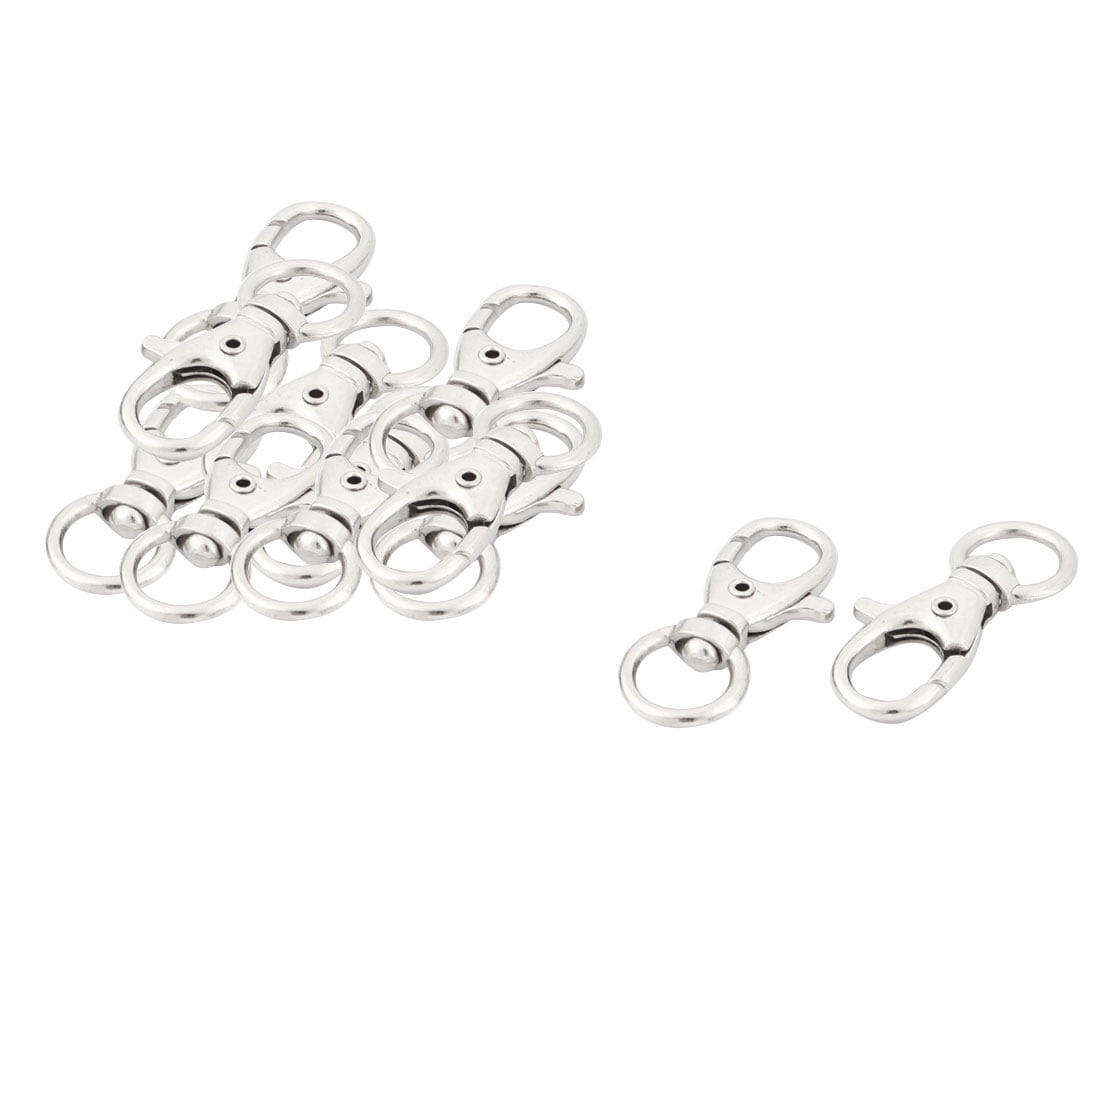 8 Golden Pewter Swivel Lobster Clasps 35x13mm for Key Rings & Dog Leashes 